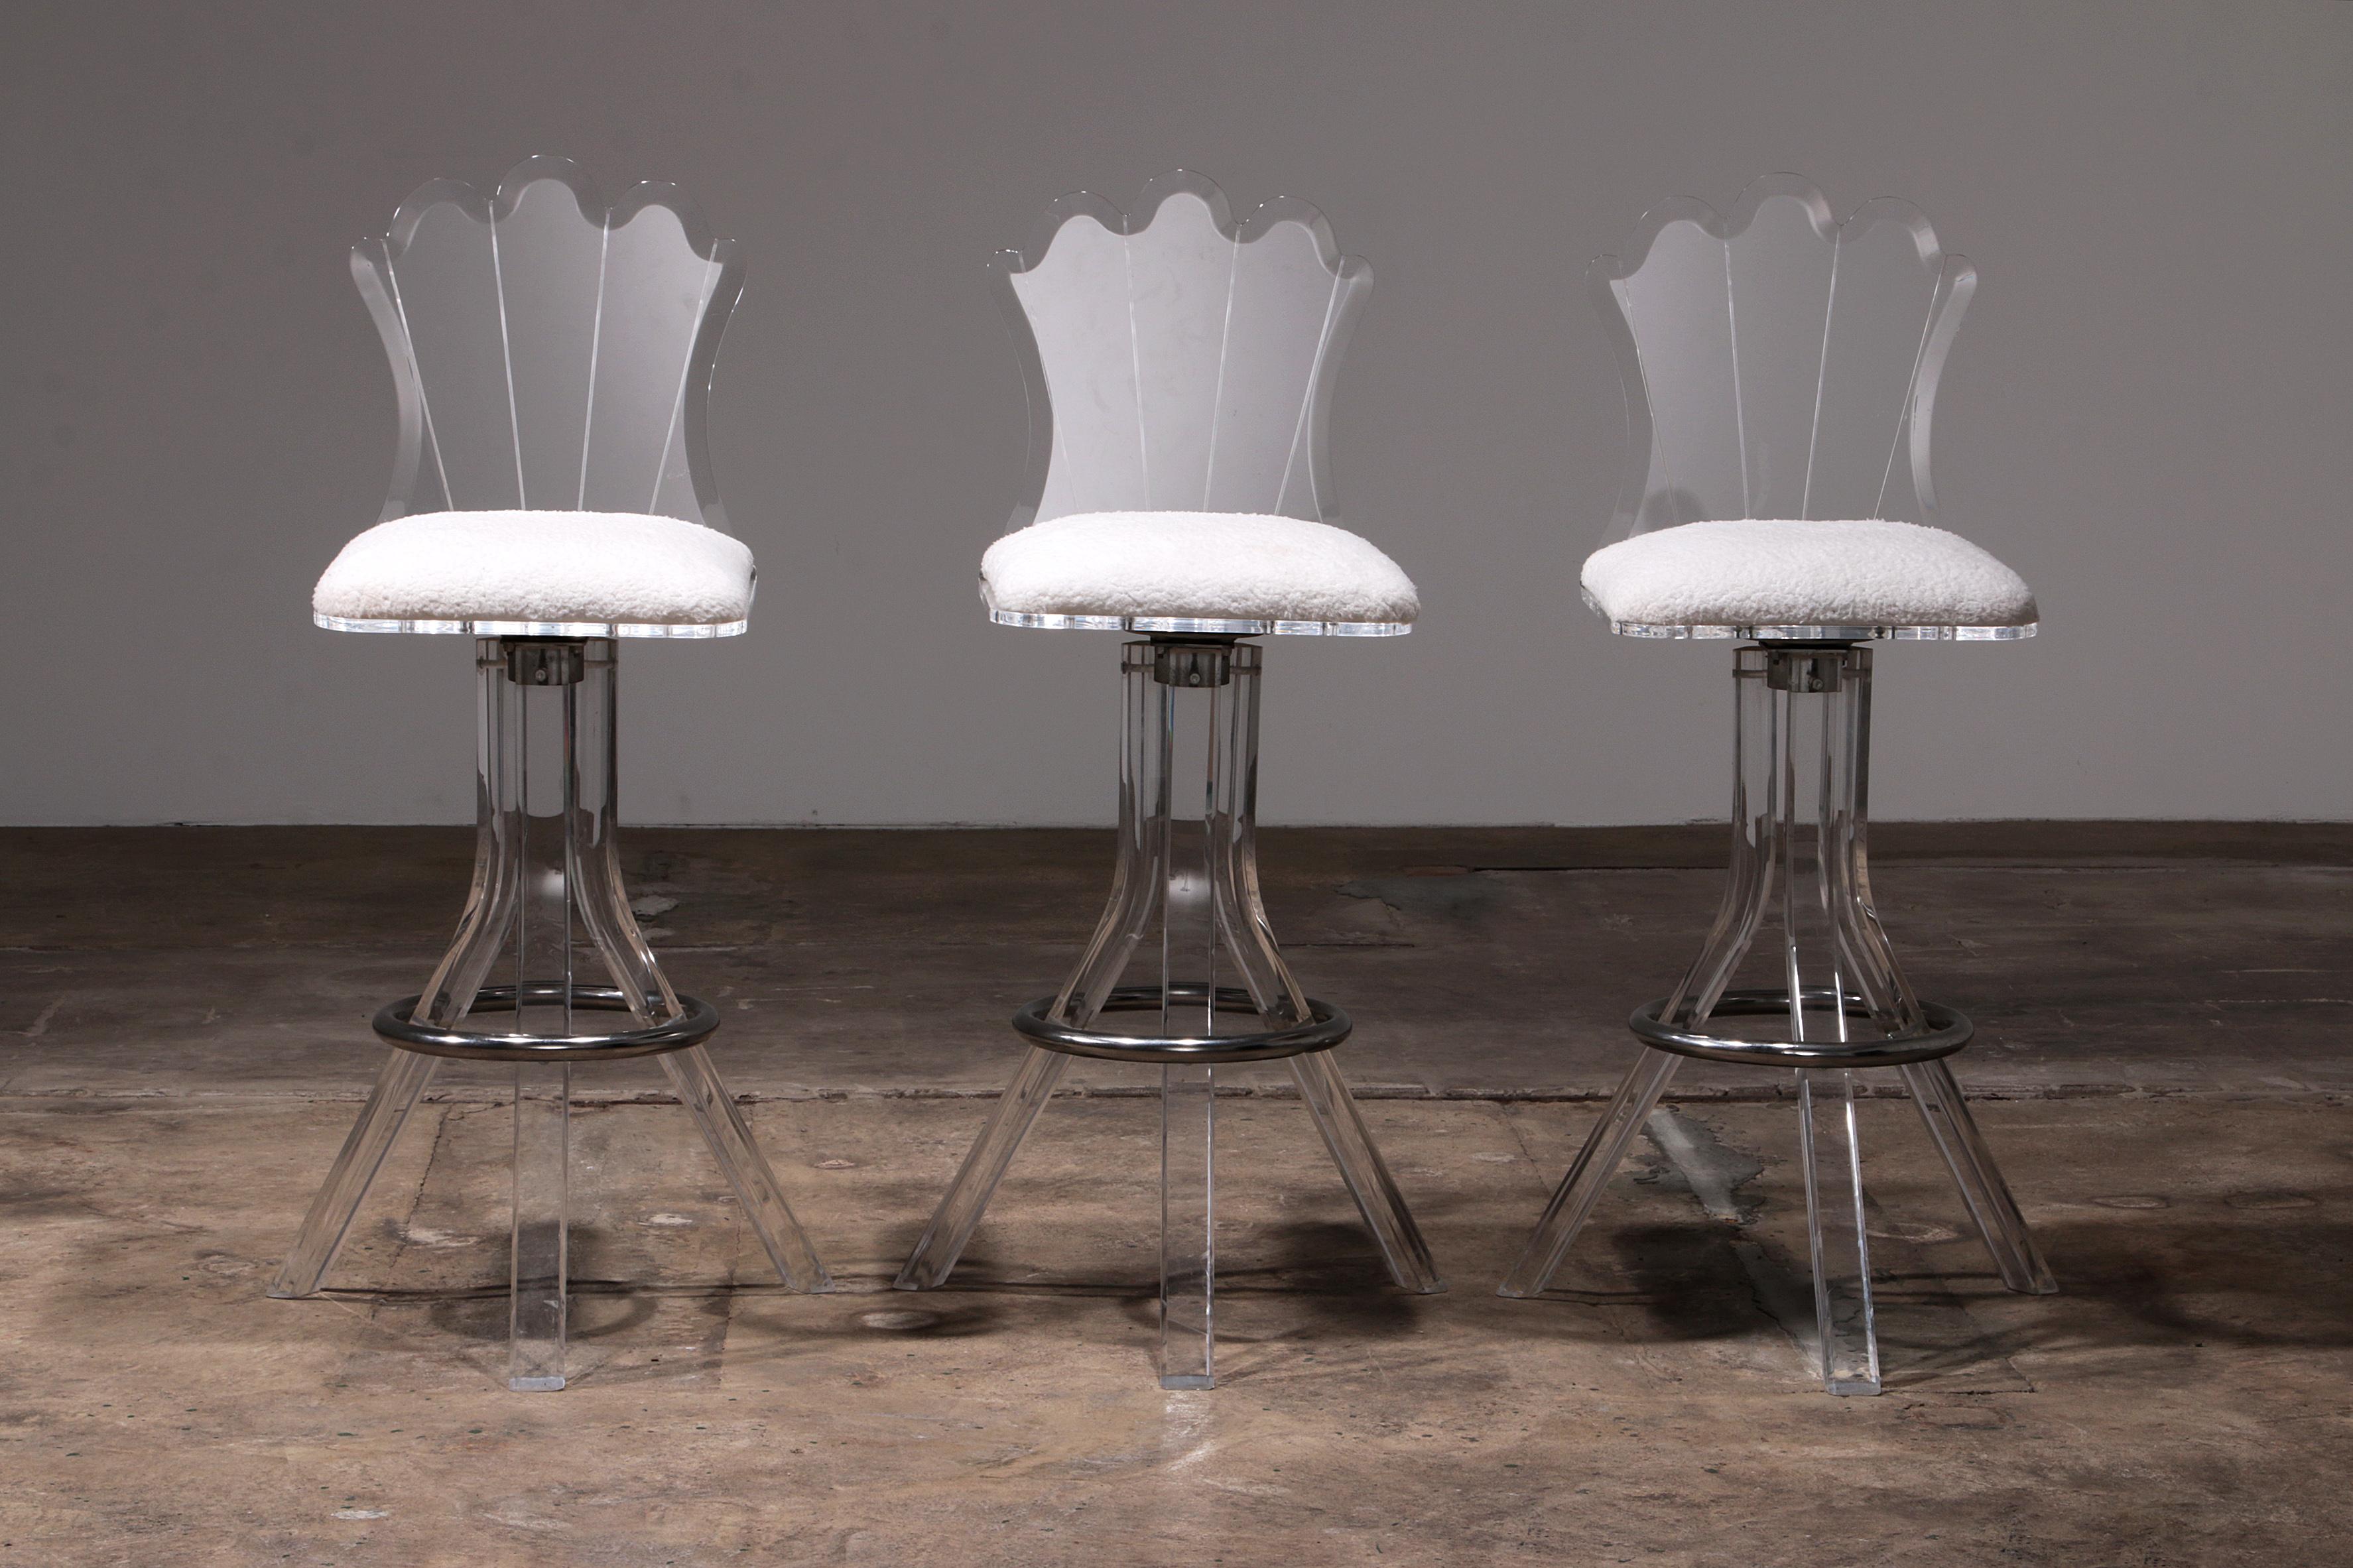 Central American Plexiglass lucite bar stools and chrome swivel bar chairs, Hill Manufacturers For Sale